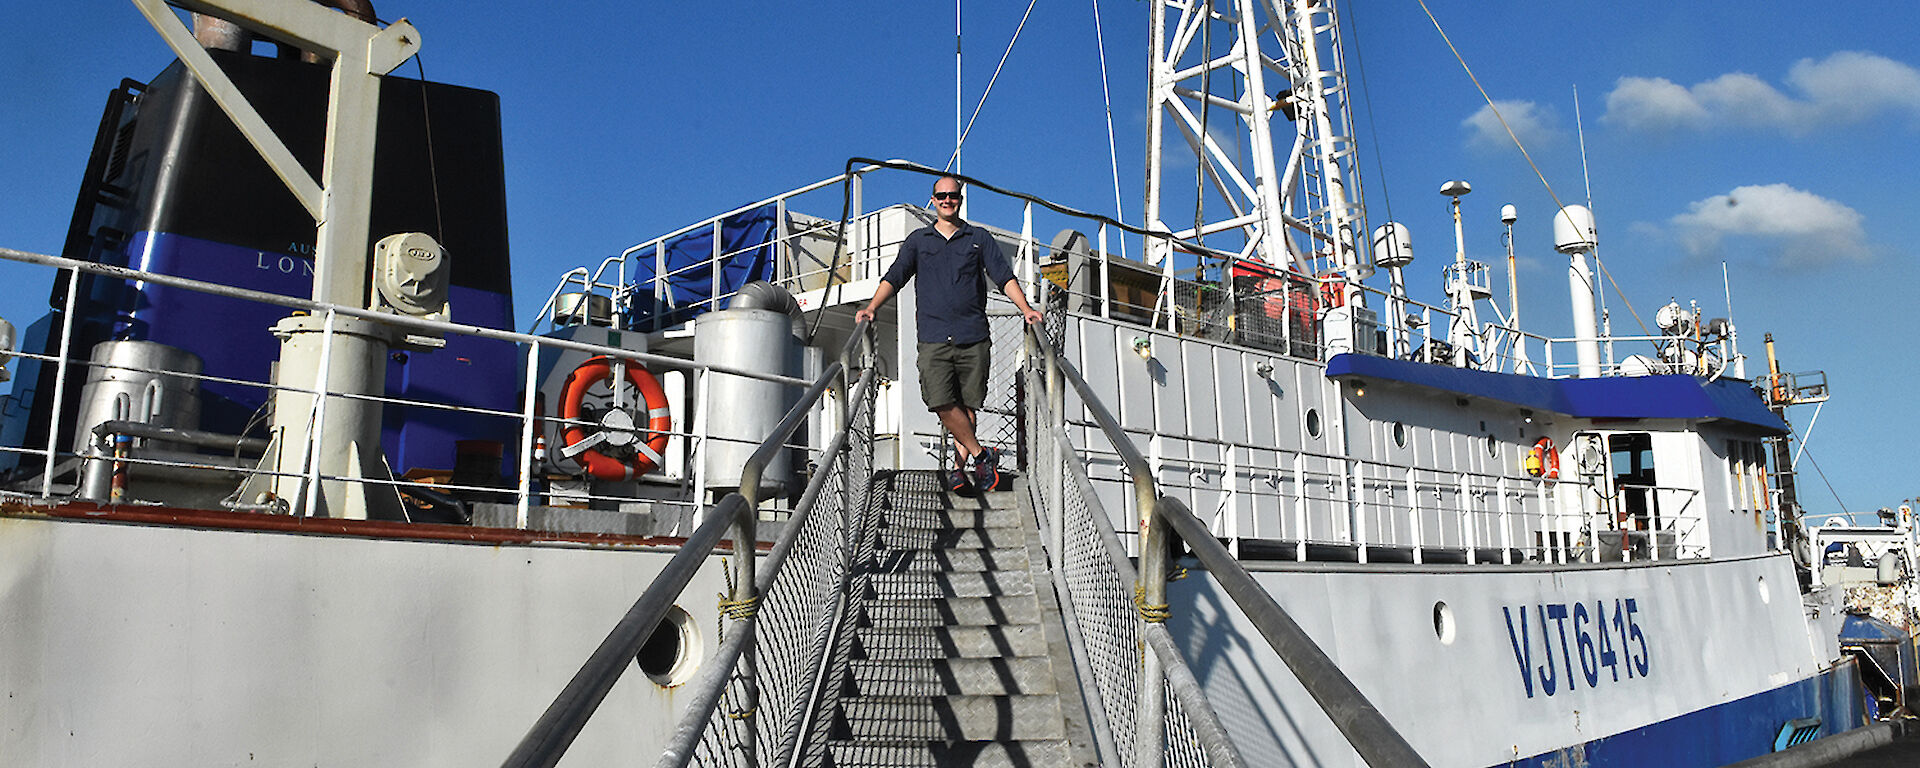 Dale Maschette at the top of the ramp of a fishing boat.